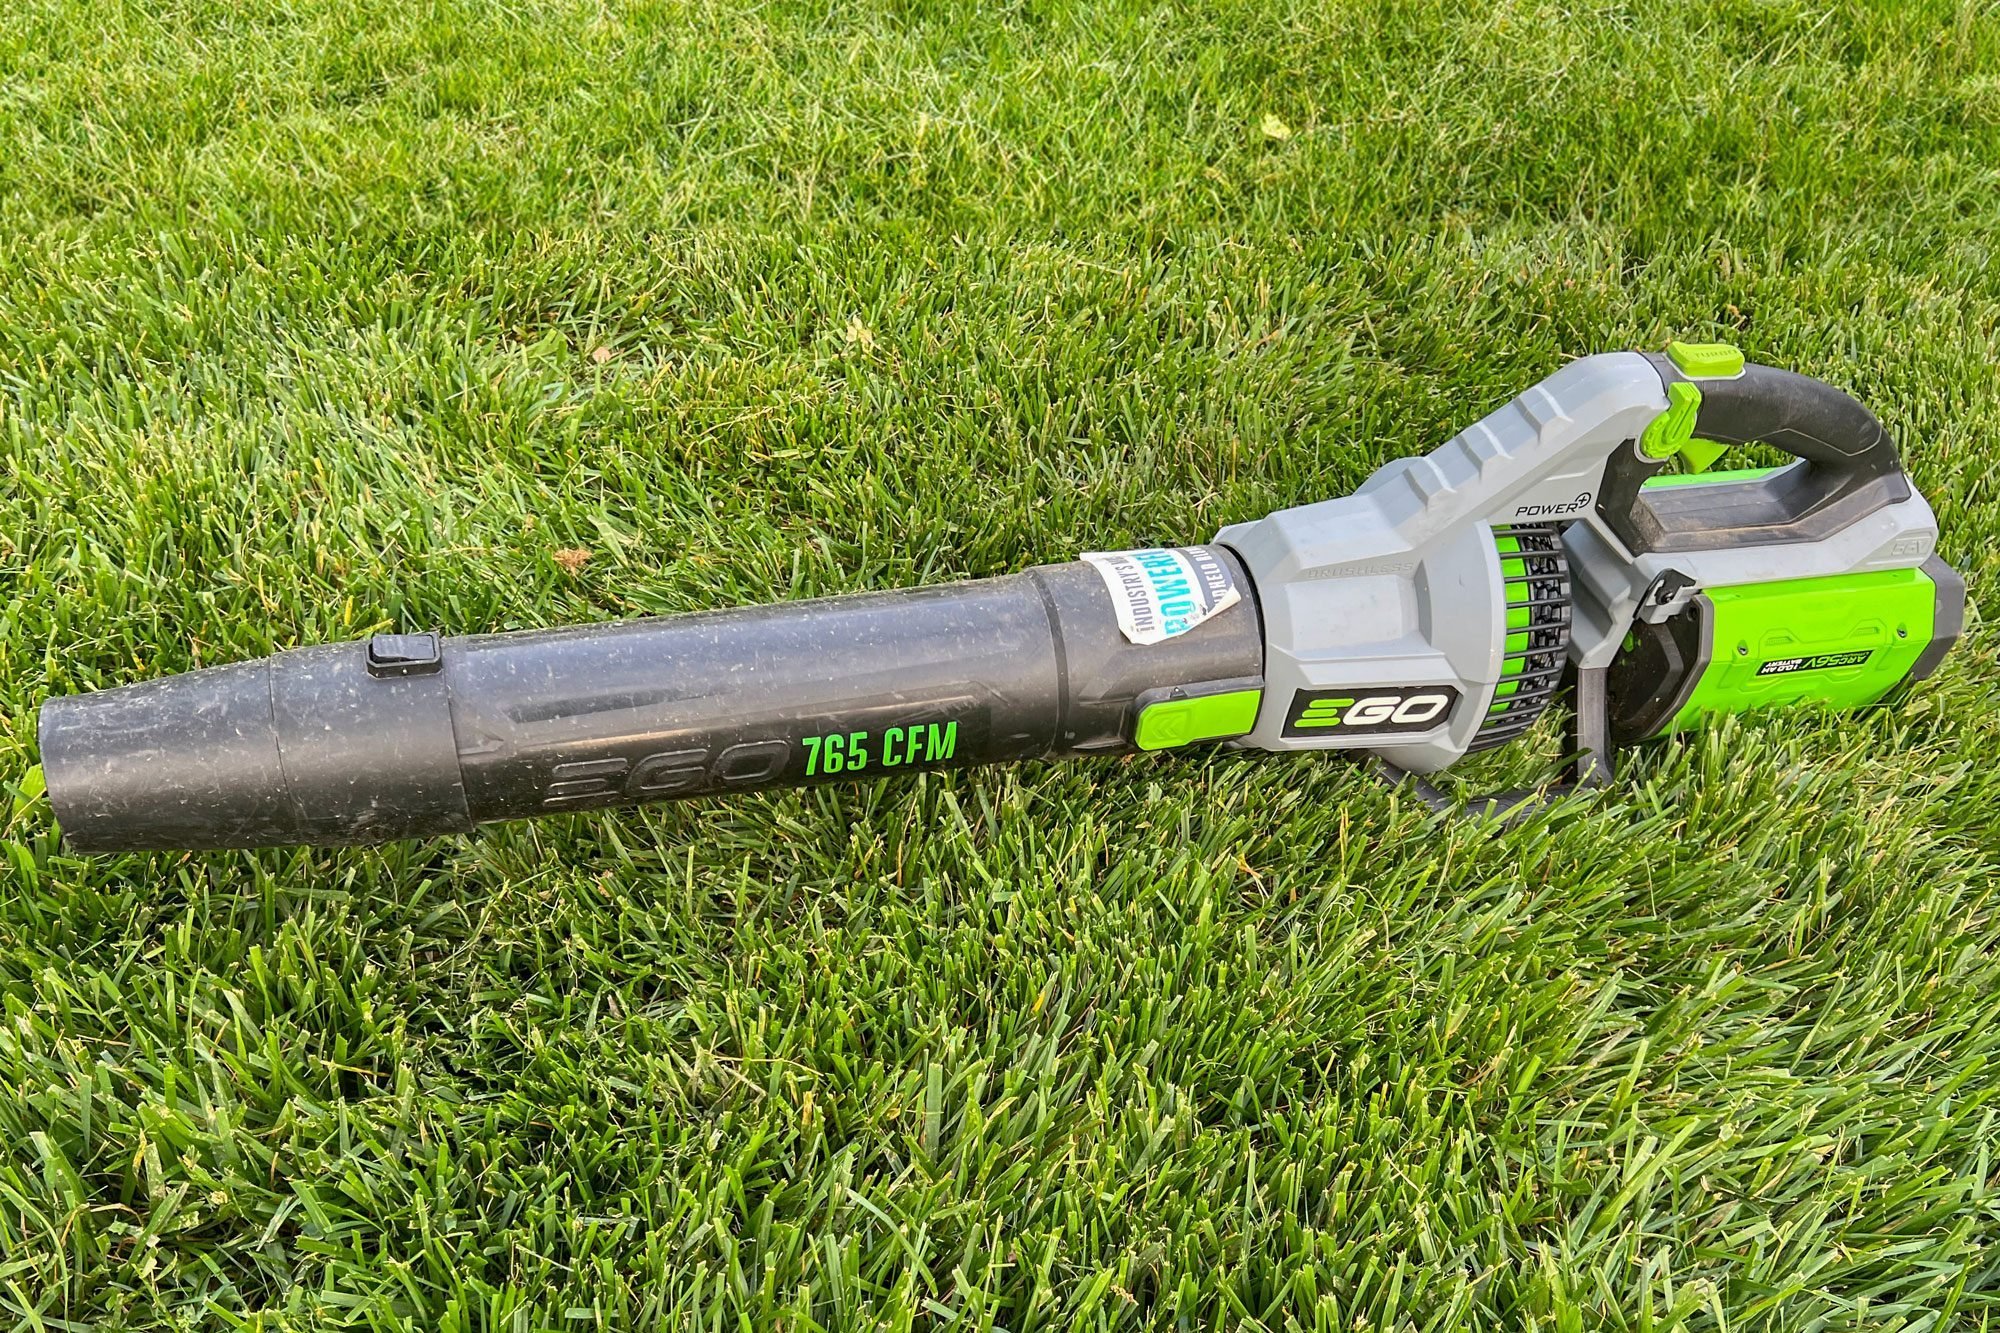 Ego Leaf Blower Review: I Tried It, and Here's What You Need to Know